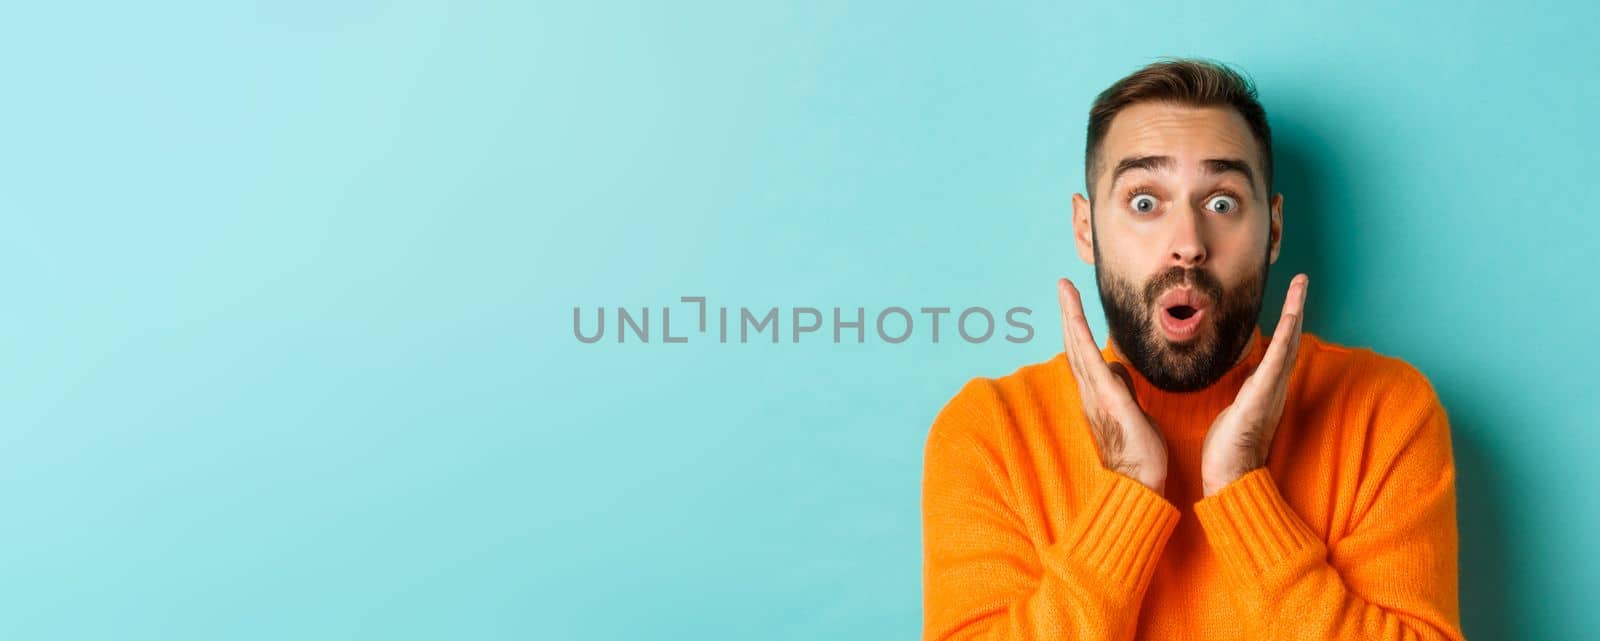 Close-up of handsome caucasian man staring at camera surprised, wearing orange sweater, standing against turquoise background.